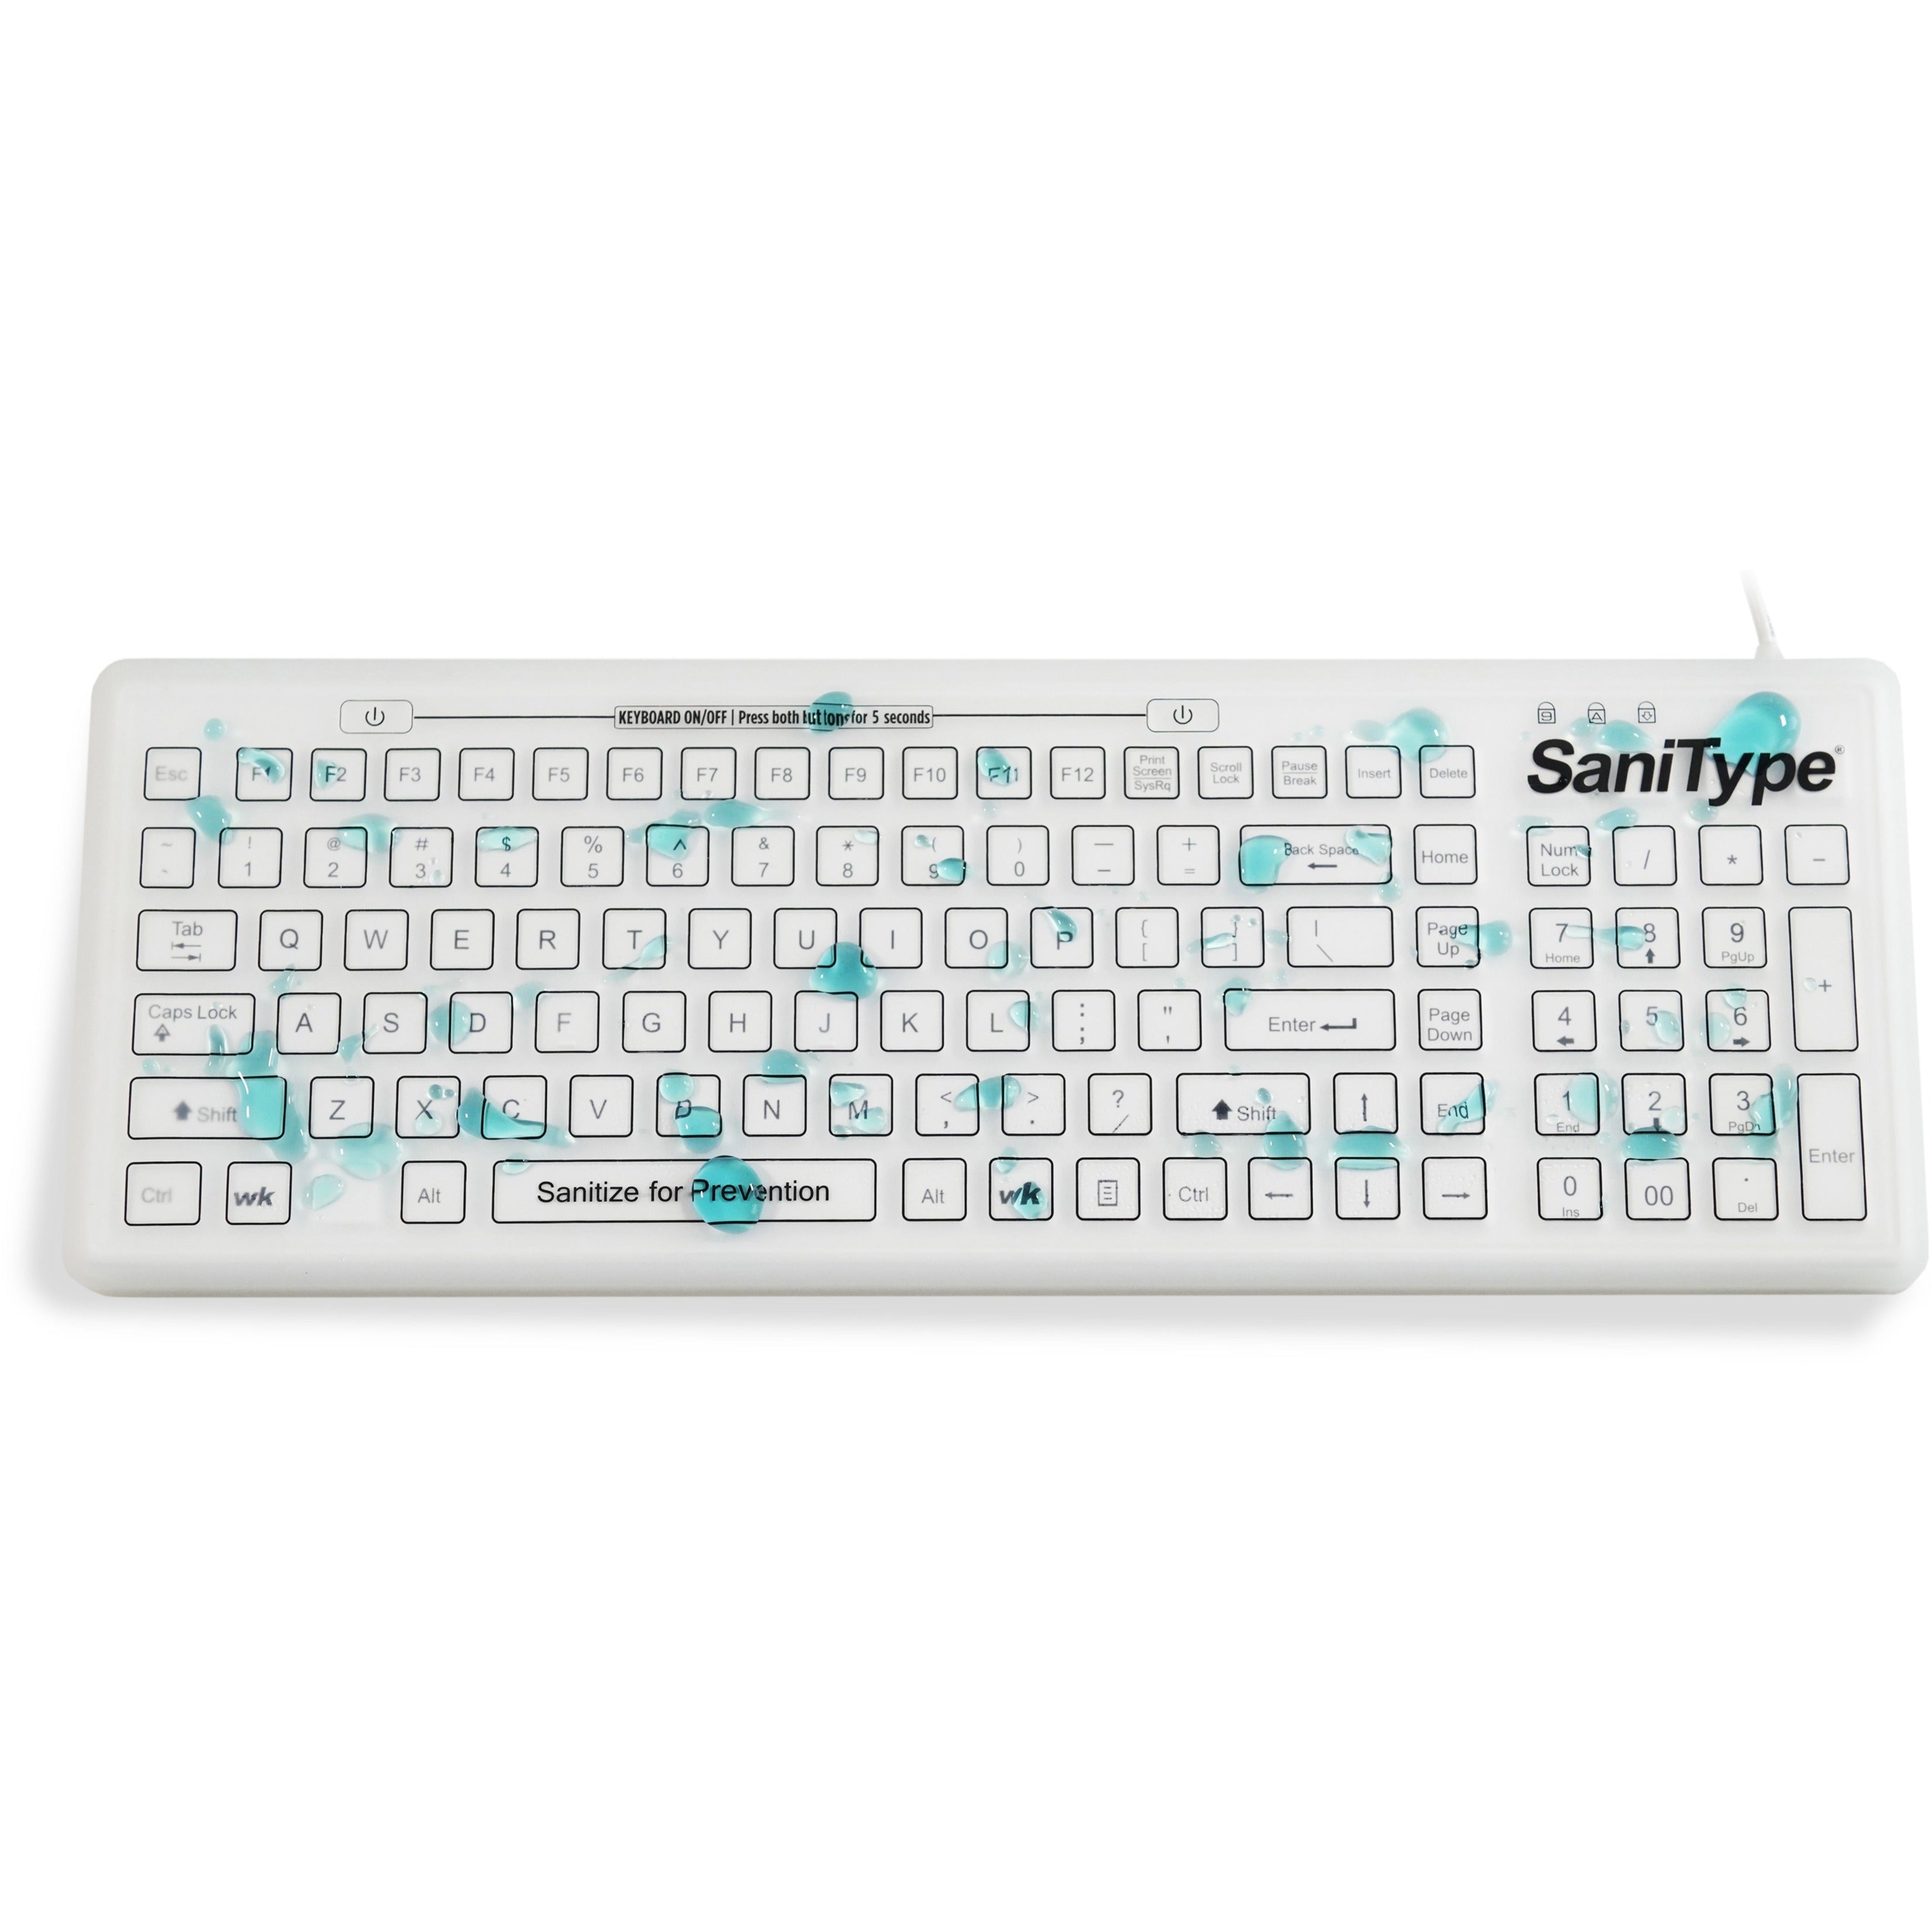 SaniType KBSTRC106SC-W Swipe Clean Smooth Surface Washable Keyboard, Hygienic and Sanitary Typing